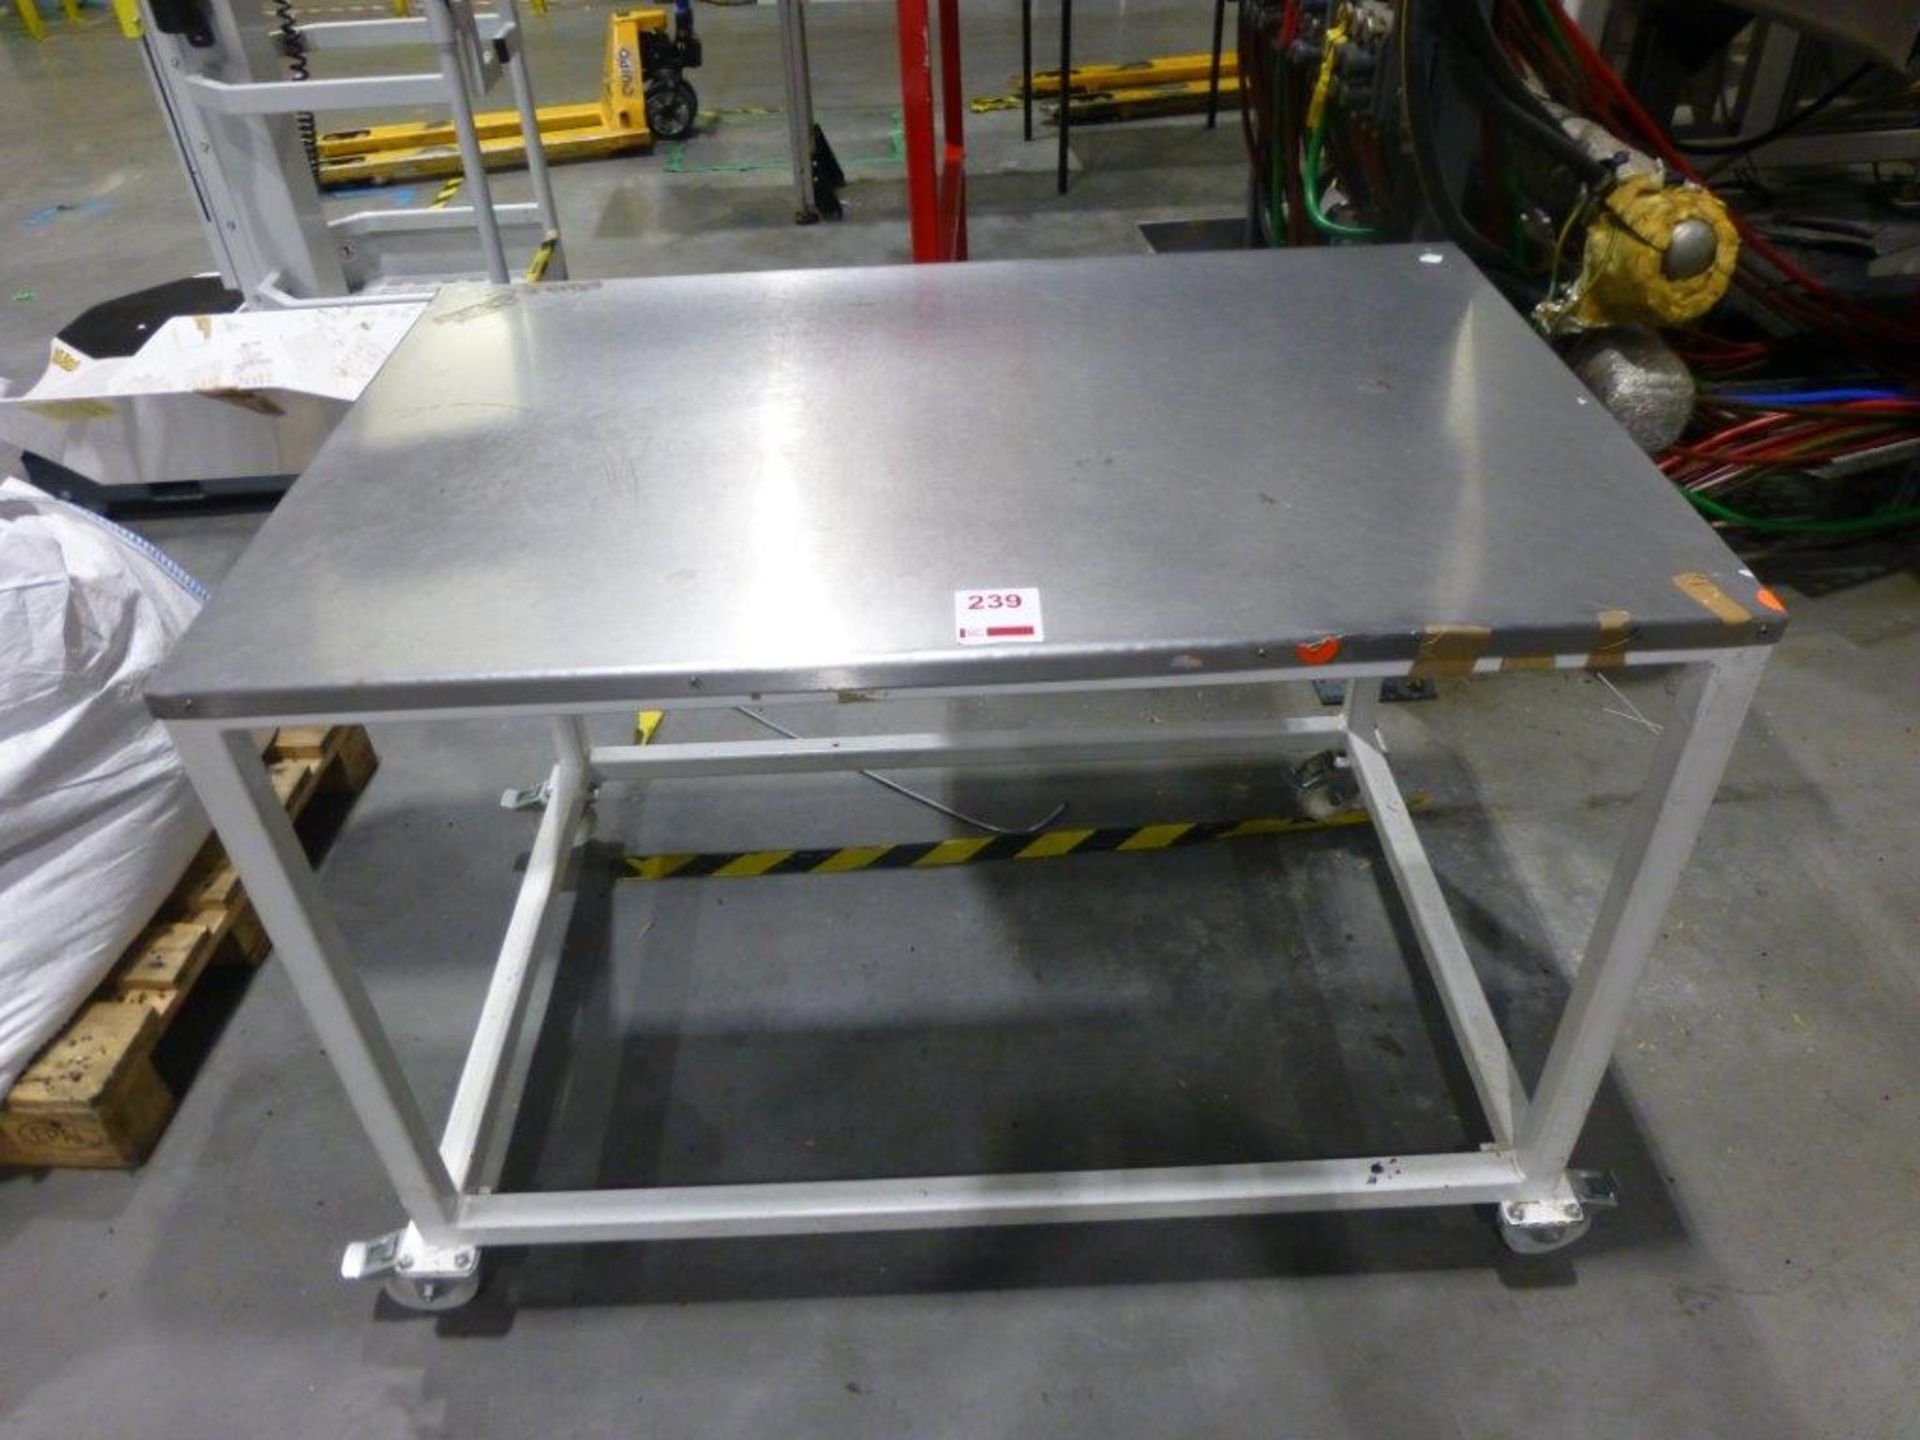 1200mm x 800mm x 820mm stainless steel topped mobile work table